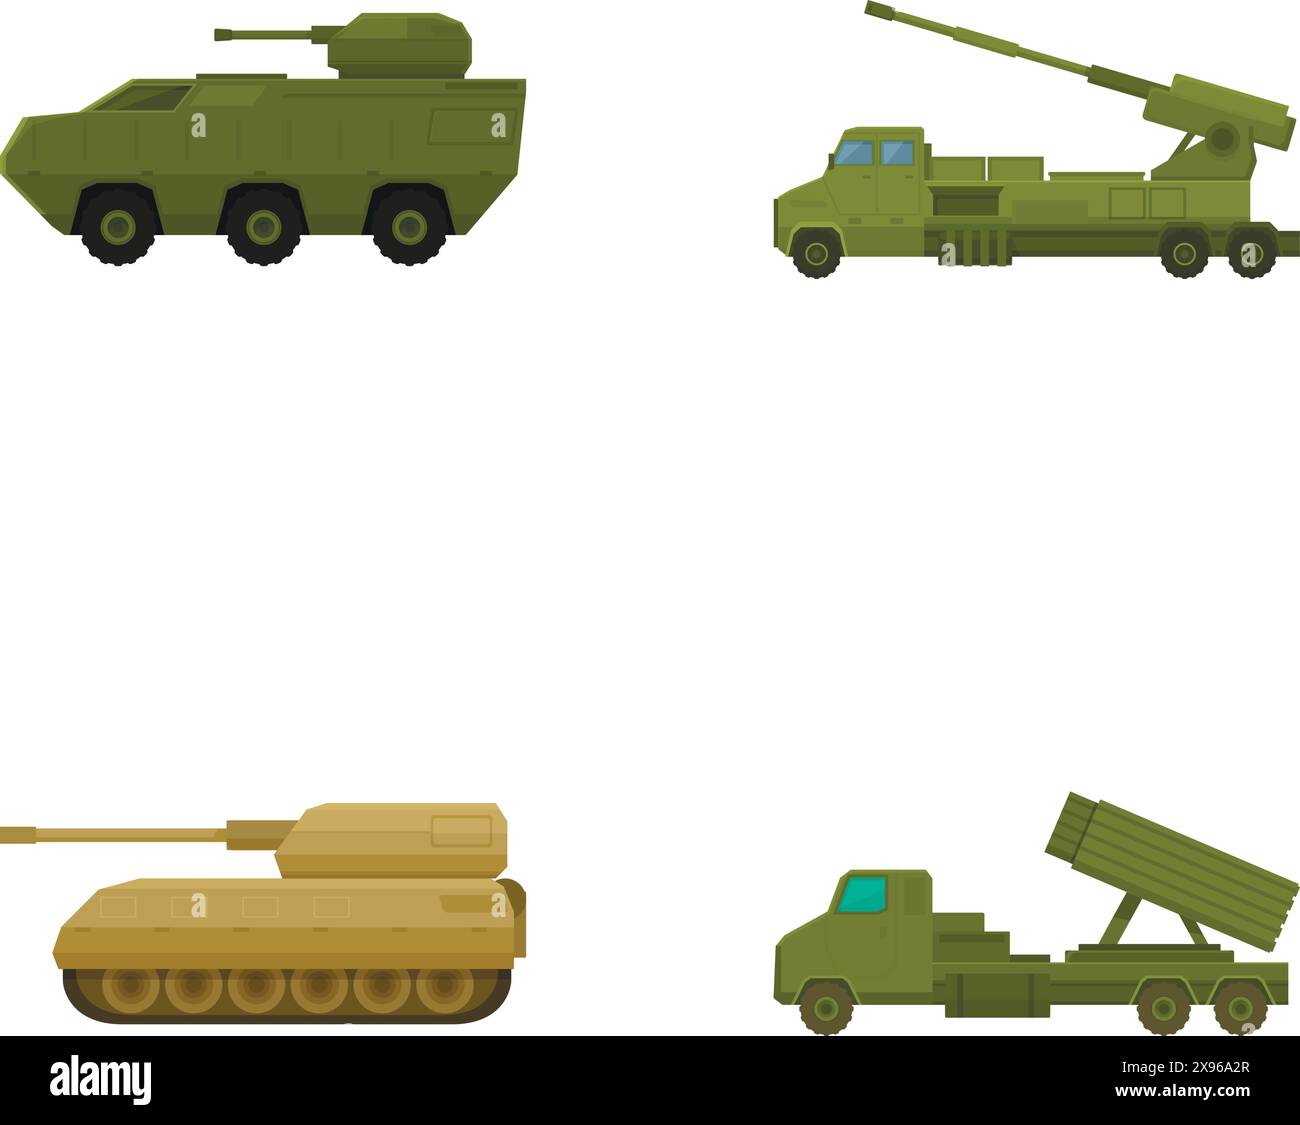 Illustration of four types of modern military vehicles, including a tank and mobile artillery Stock Vector